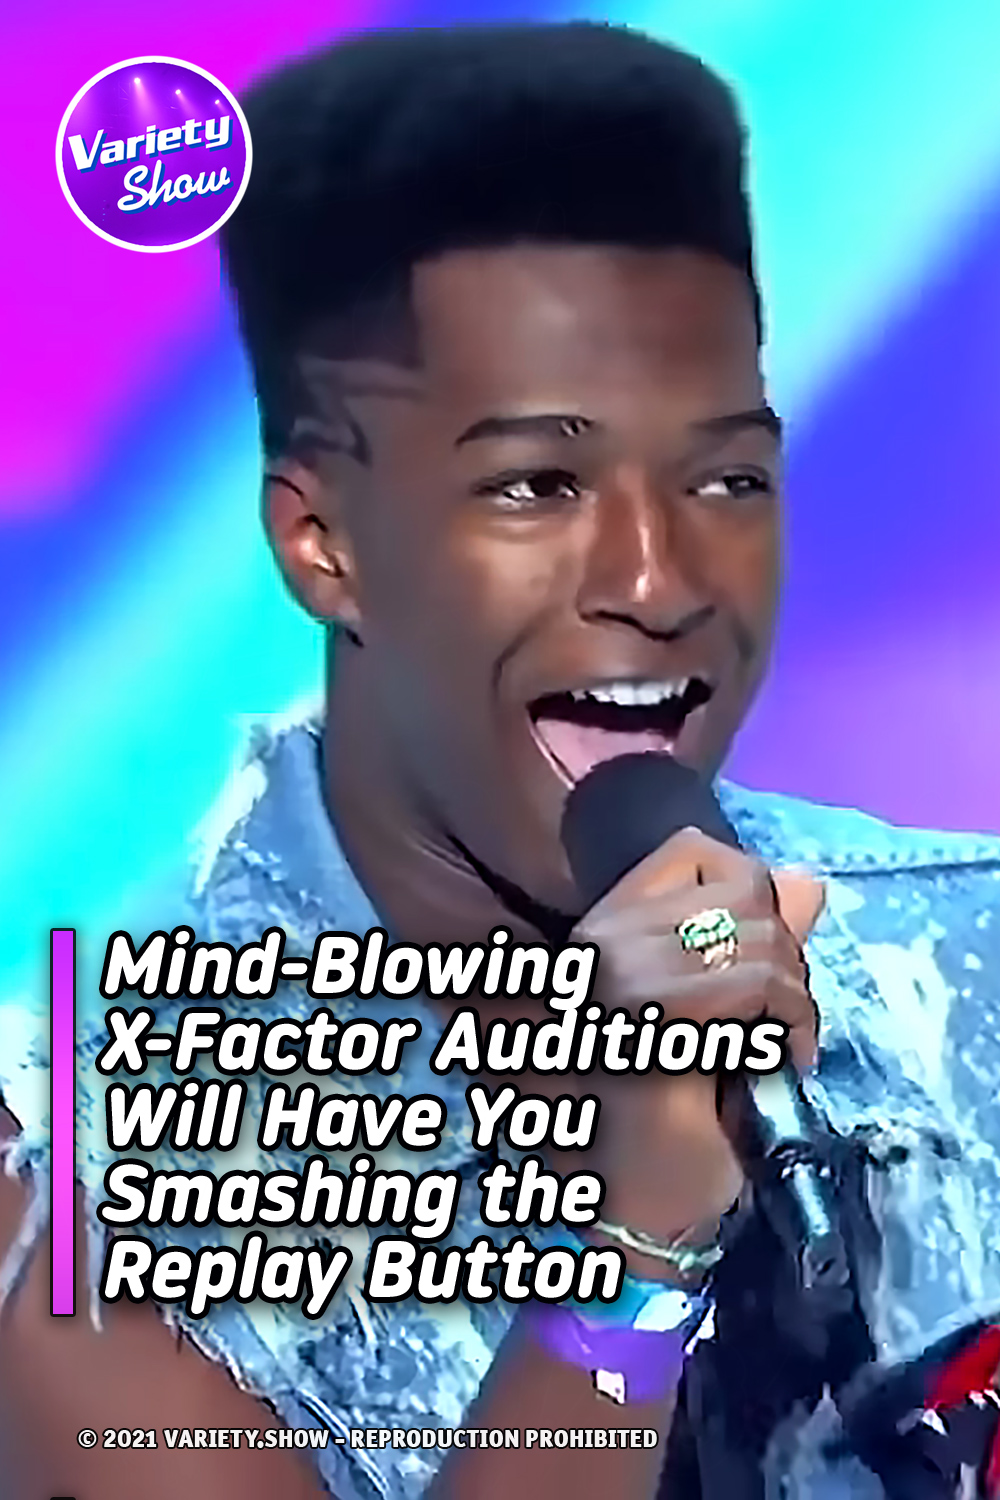 Mind-Blowing X-Factor Auditions Will Have You Smashing the Replay Button